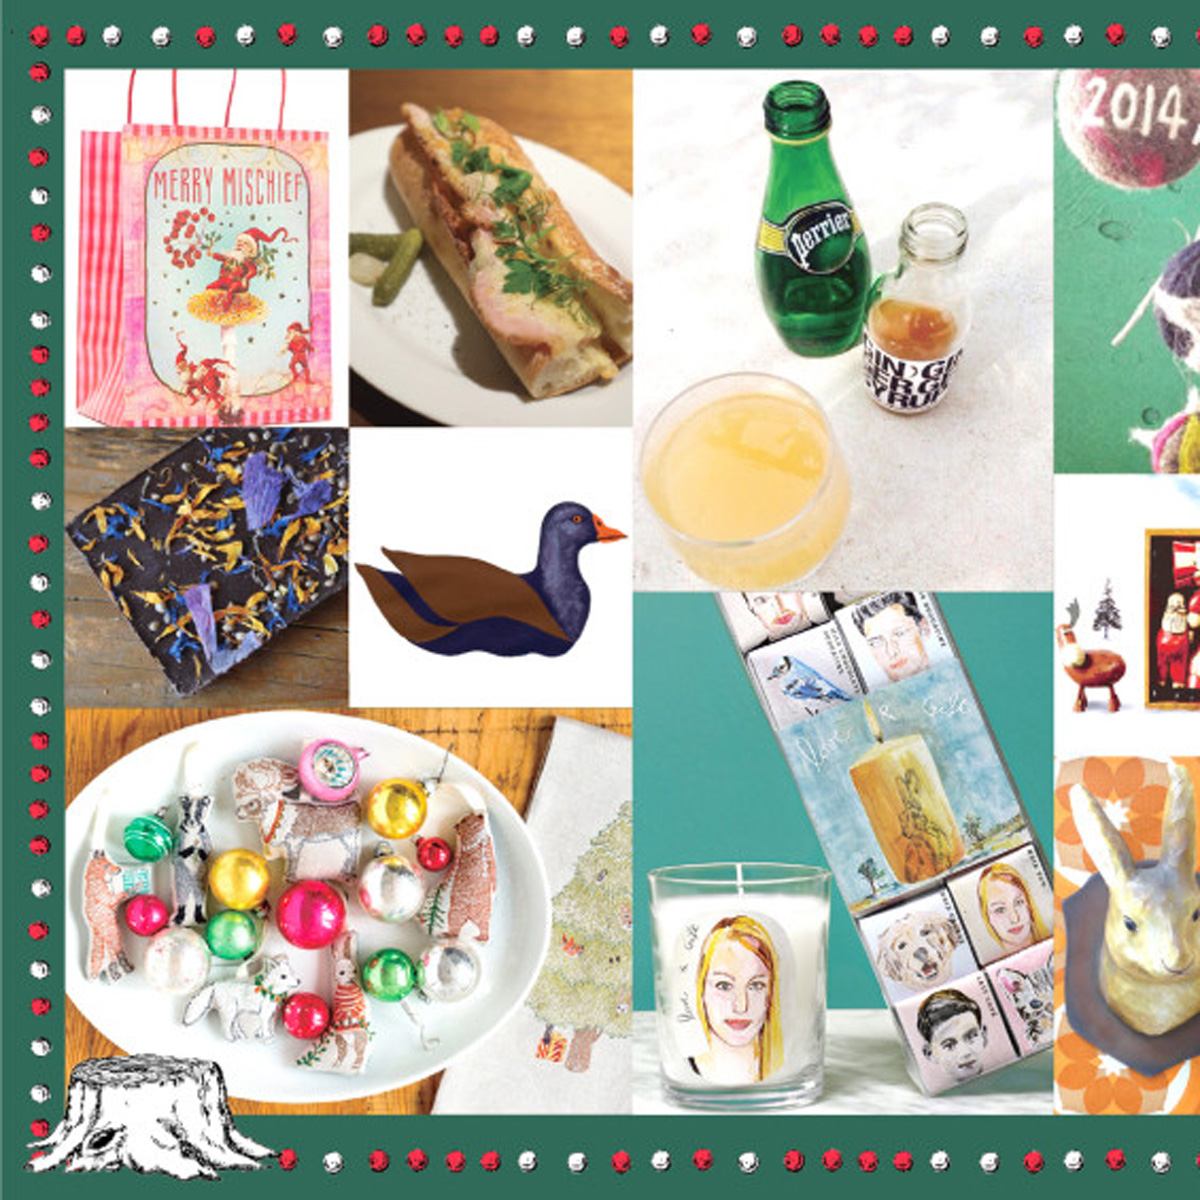 OMOTESANDO HILLS CHRISTMAS MARKET with Perrier-2014